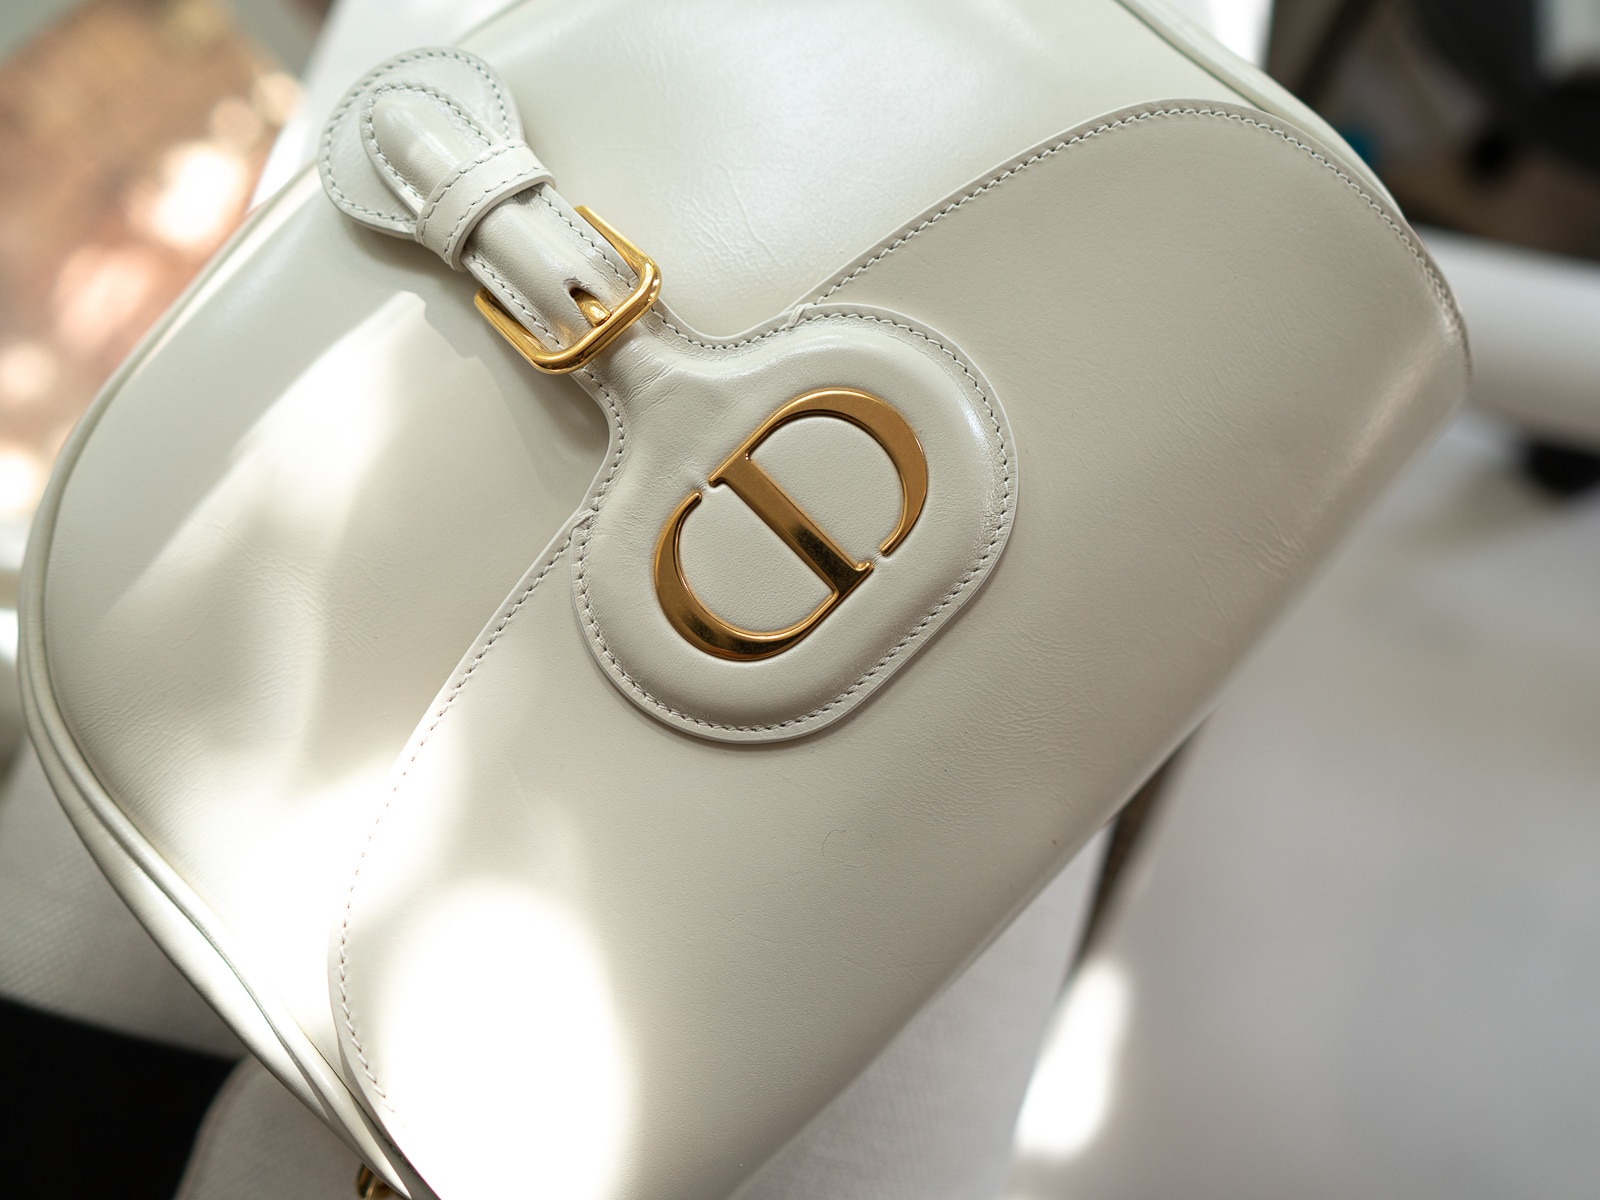 Dior Bobby Rounded Flap Bag Reference Guide - Spotted Fashion